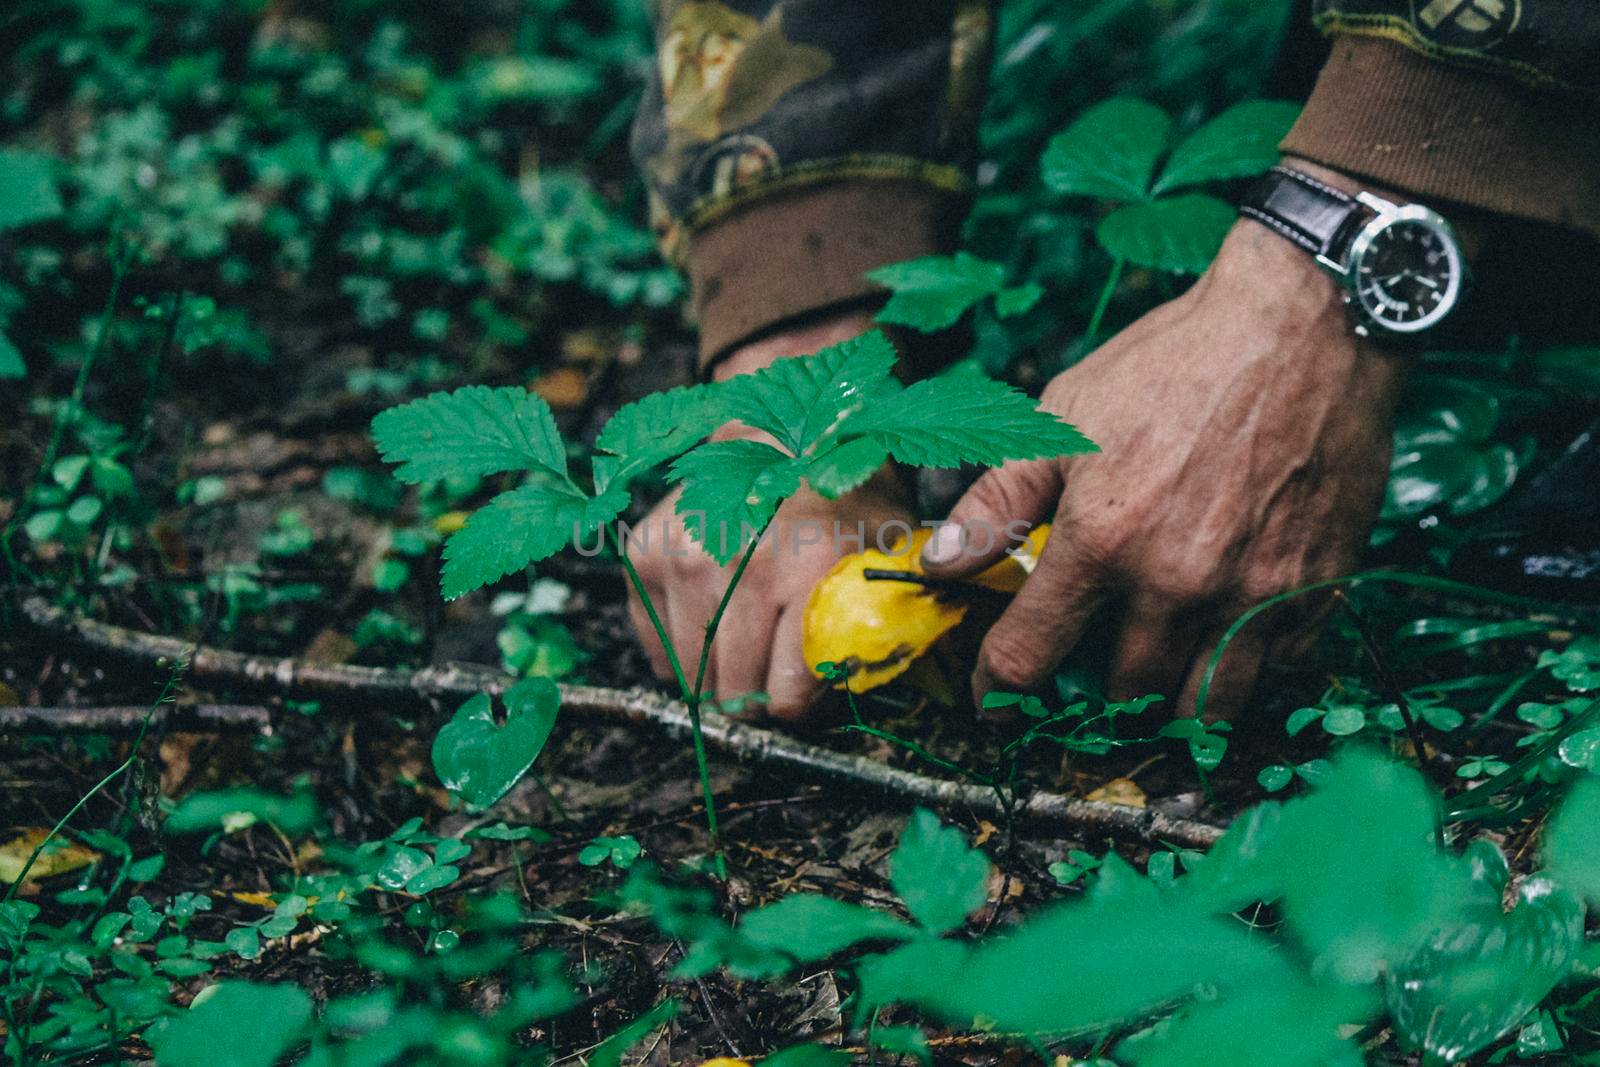 A mushroom picker cuts chanterelles with a knife in the forest . High quality photo